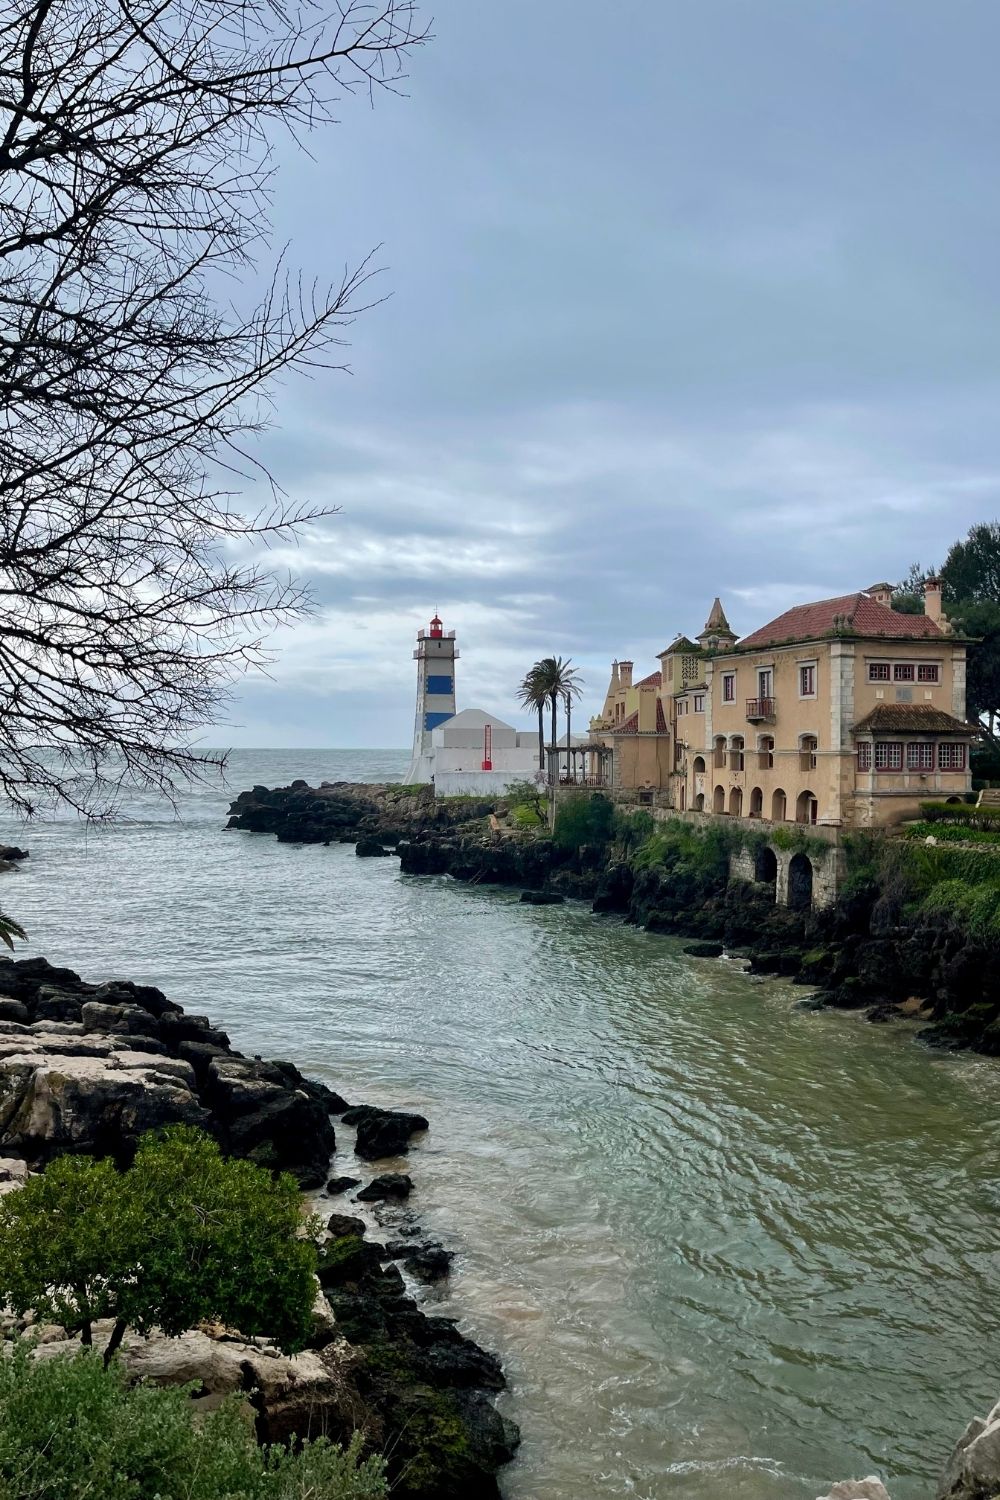 A picturesque view of Cascais's rocky coastline with a lighthouse and classic European architecture in the background, under a dramatic overcast sky, portraying a blend of natural beauty and historical charm.